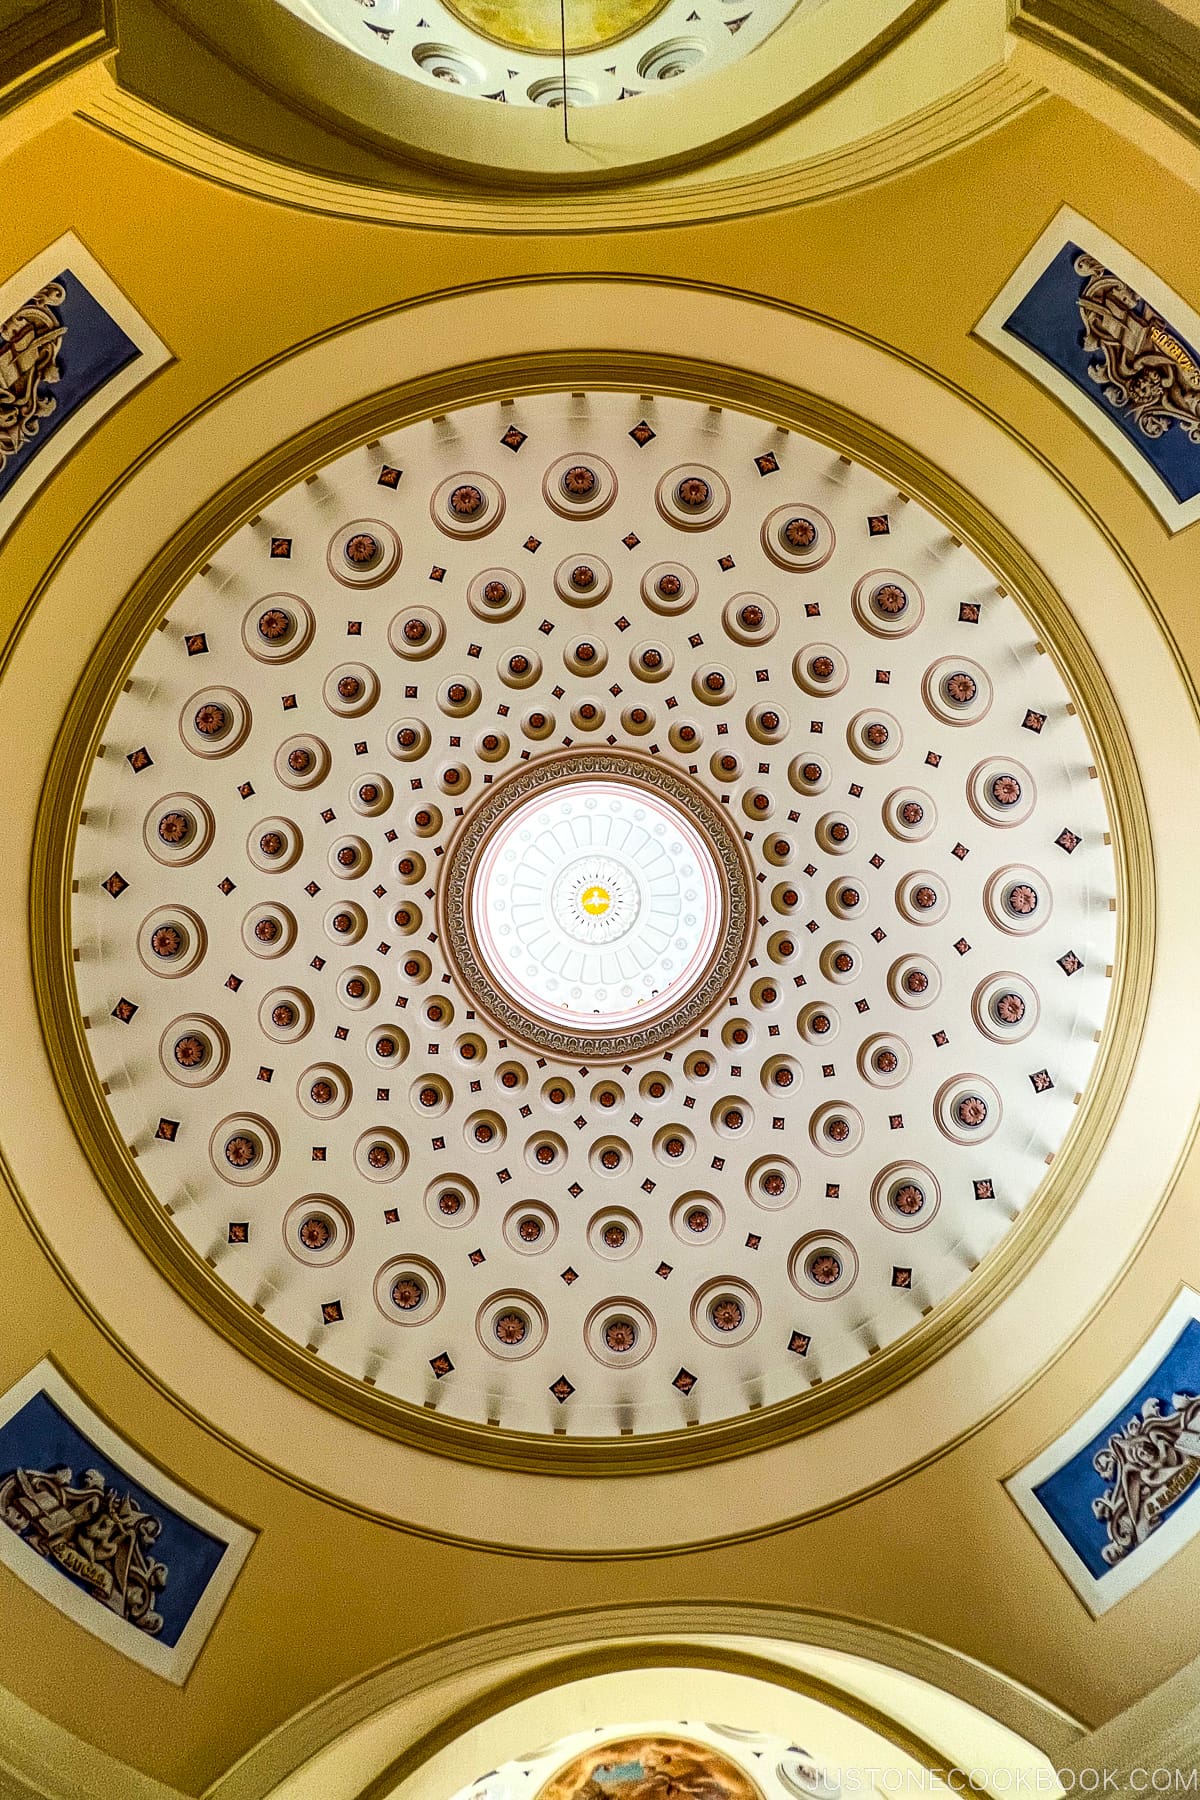 interior of the dome at Basilica of the National Shrine of the Assumption of the Blessed Virgin Mary